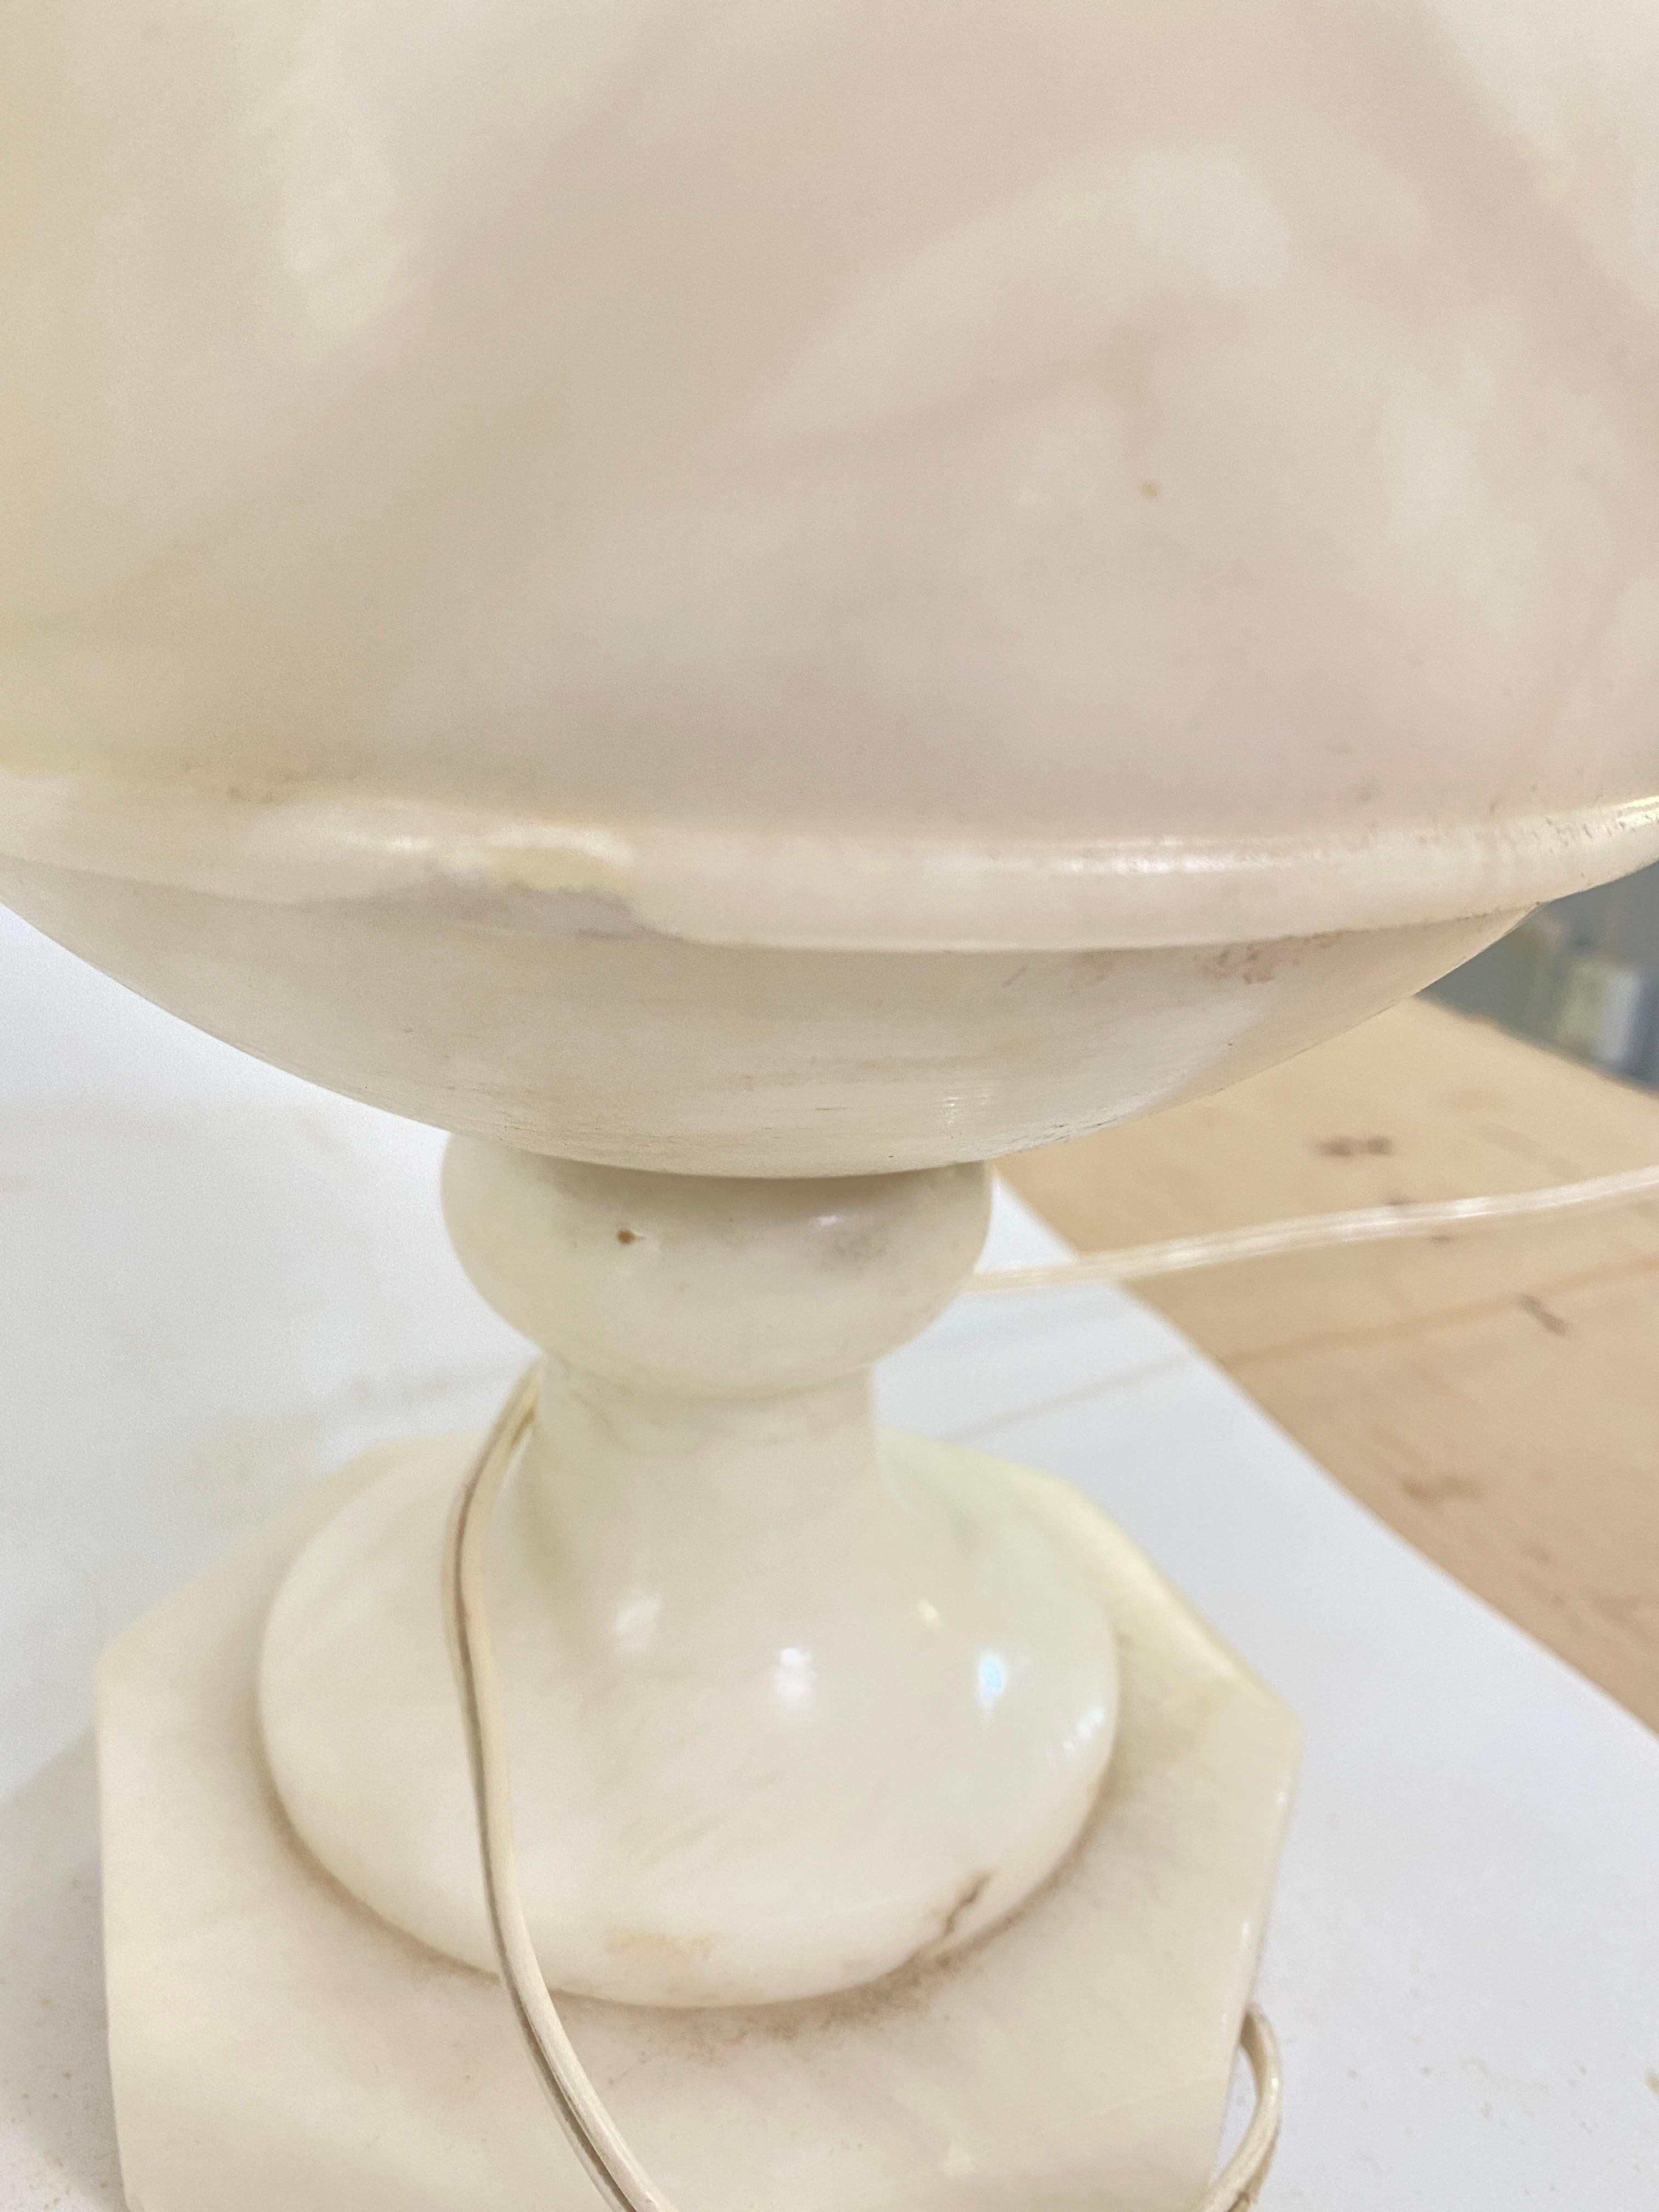 Mid-20th Century Art Deco Alabaster Urn Uplighter Table Lamp, White Color France, circa 1960 For Sale